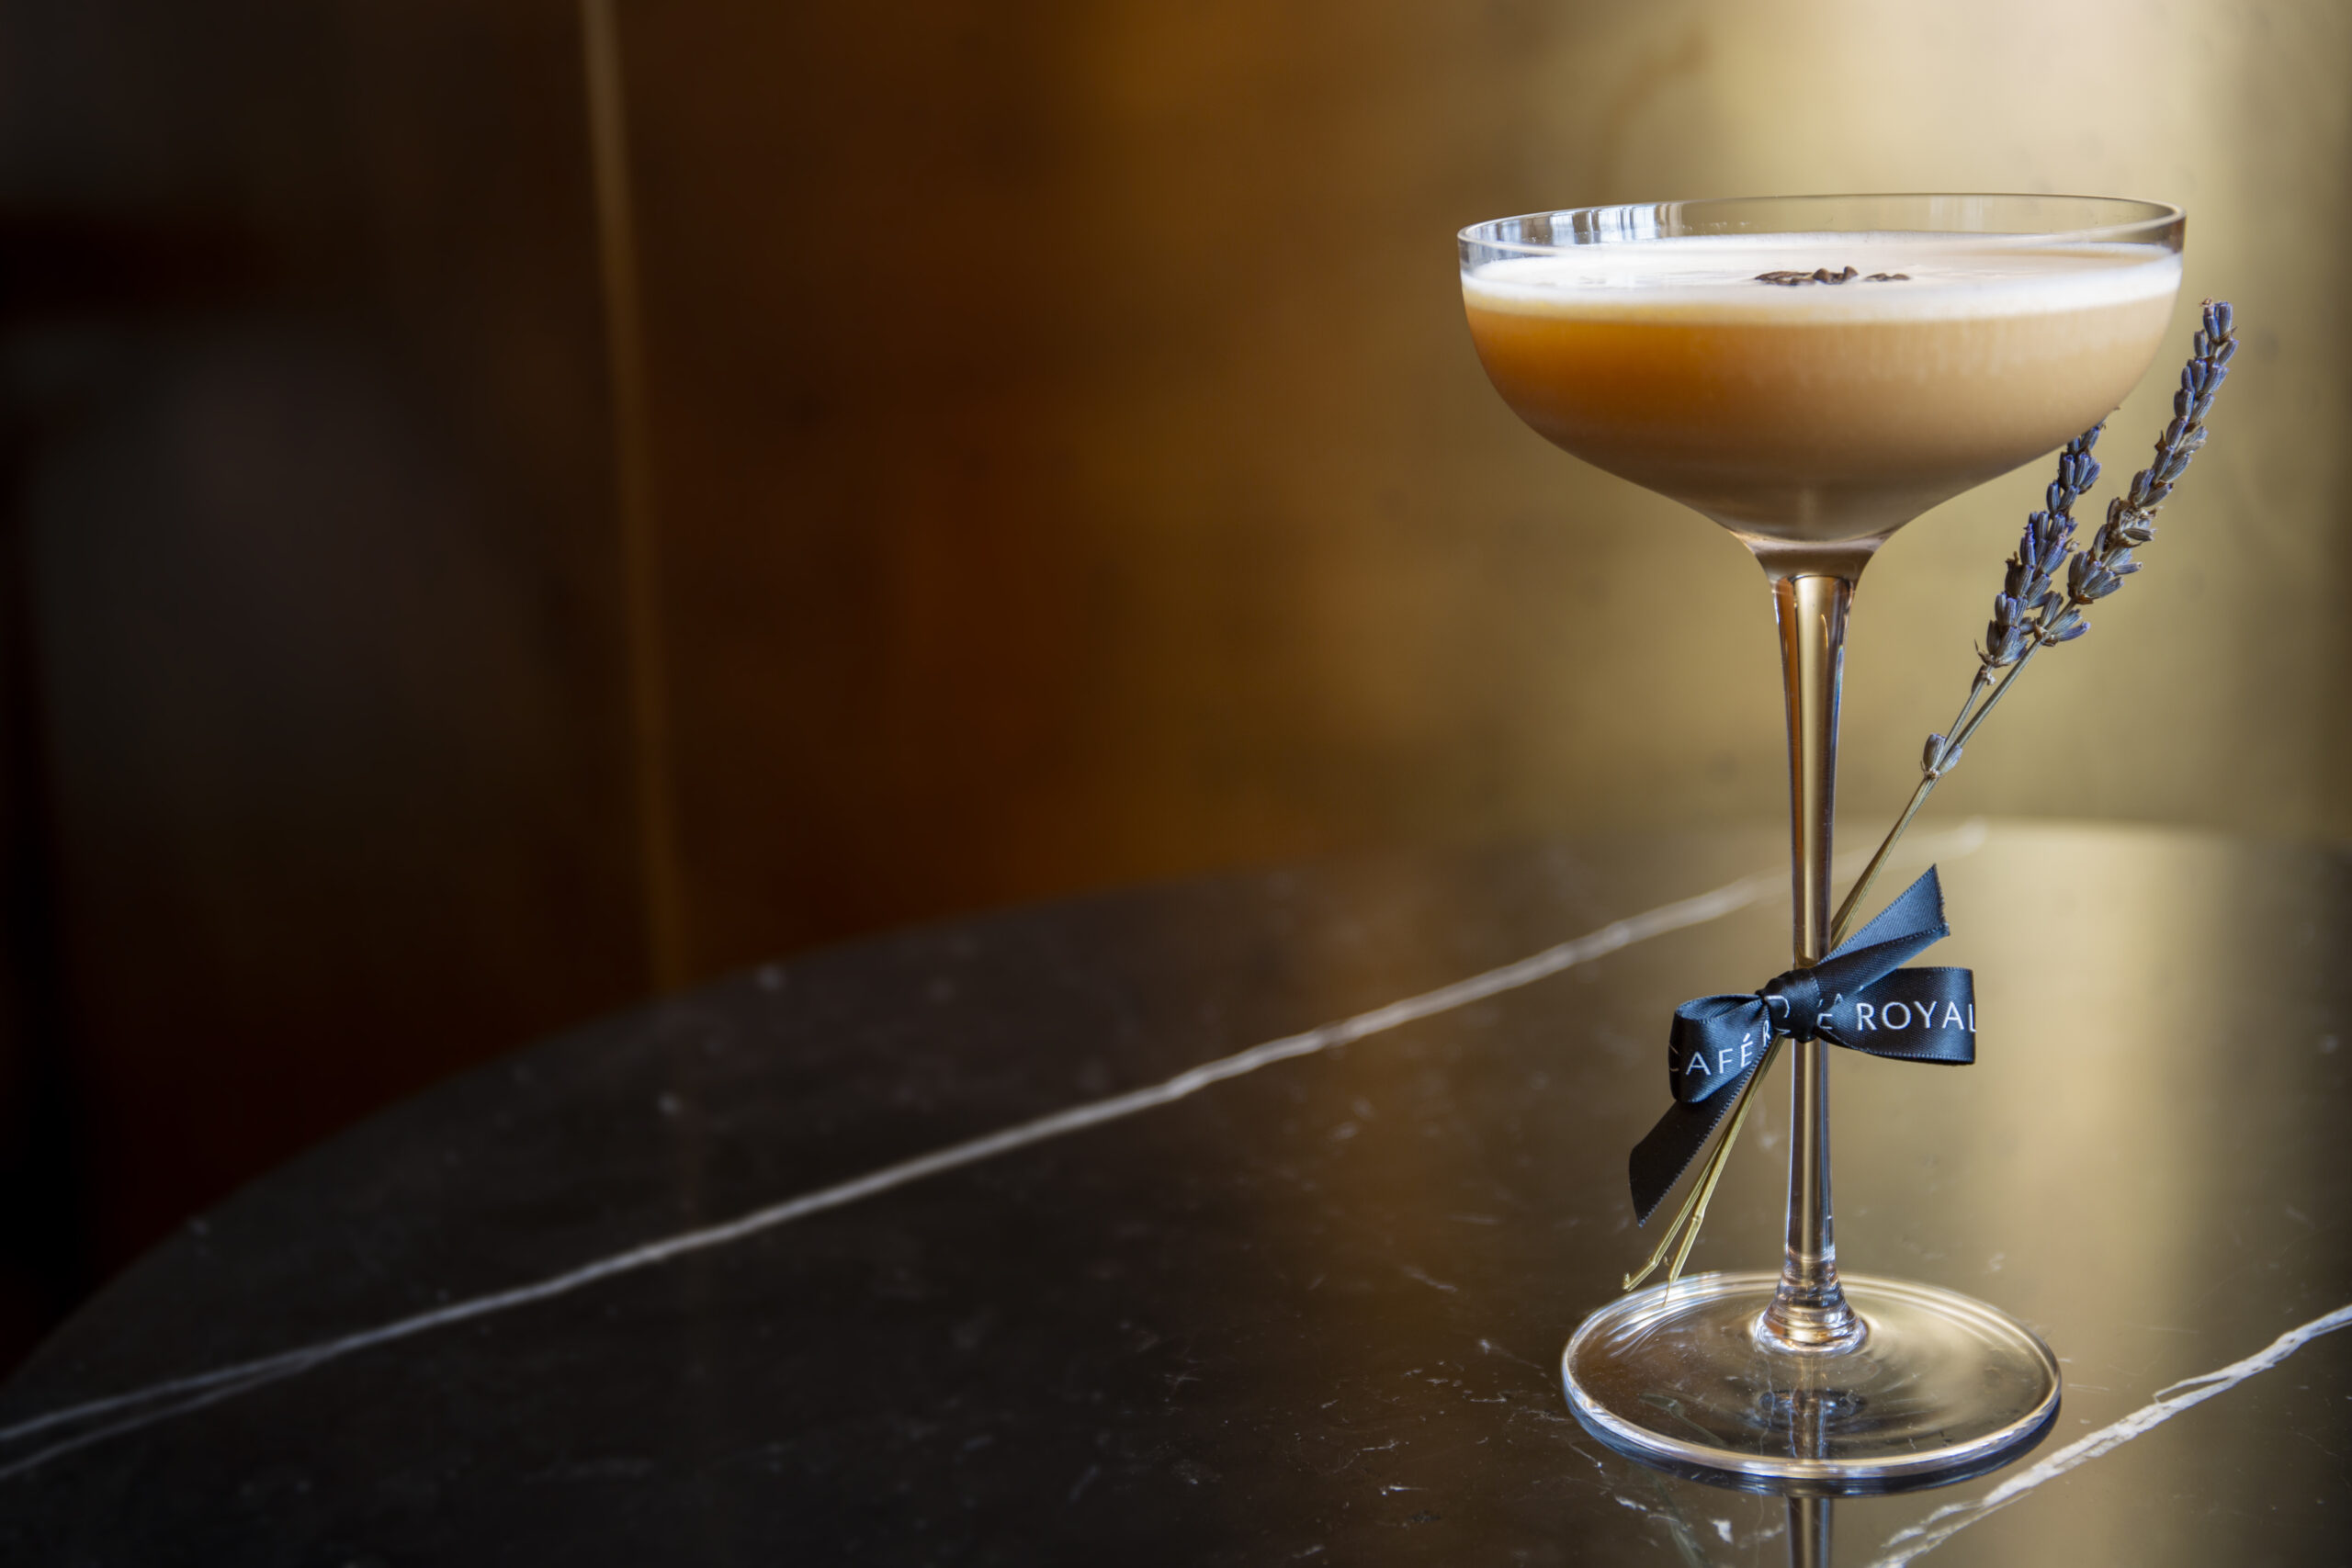 Darkness and Disgrace draws inspiration from several classic cocktails, namely the Rum Flip and Espresso Martini.